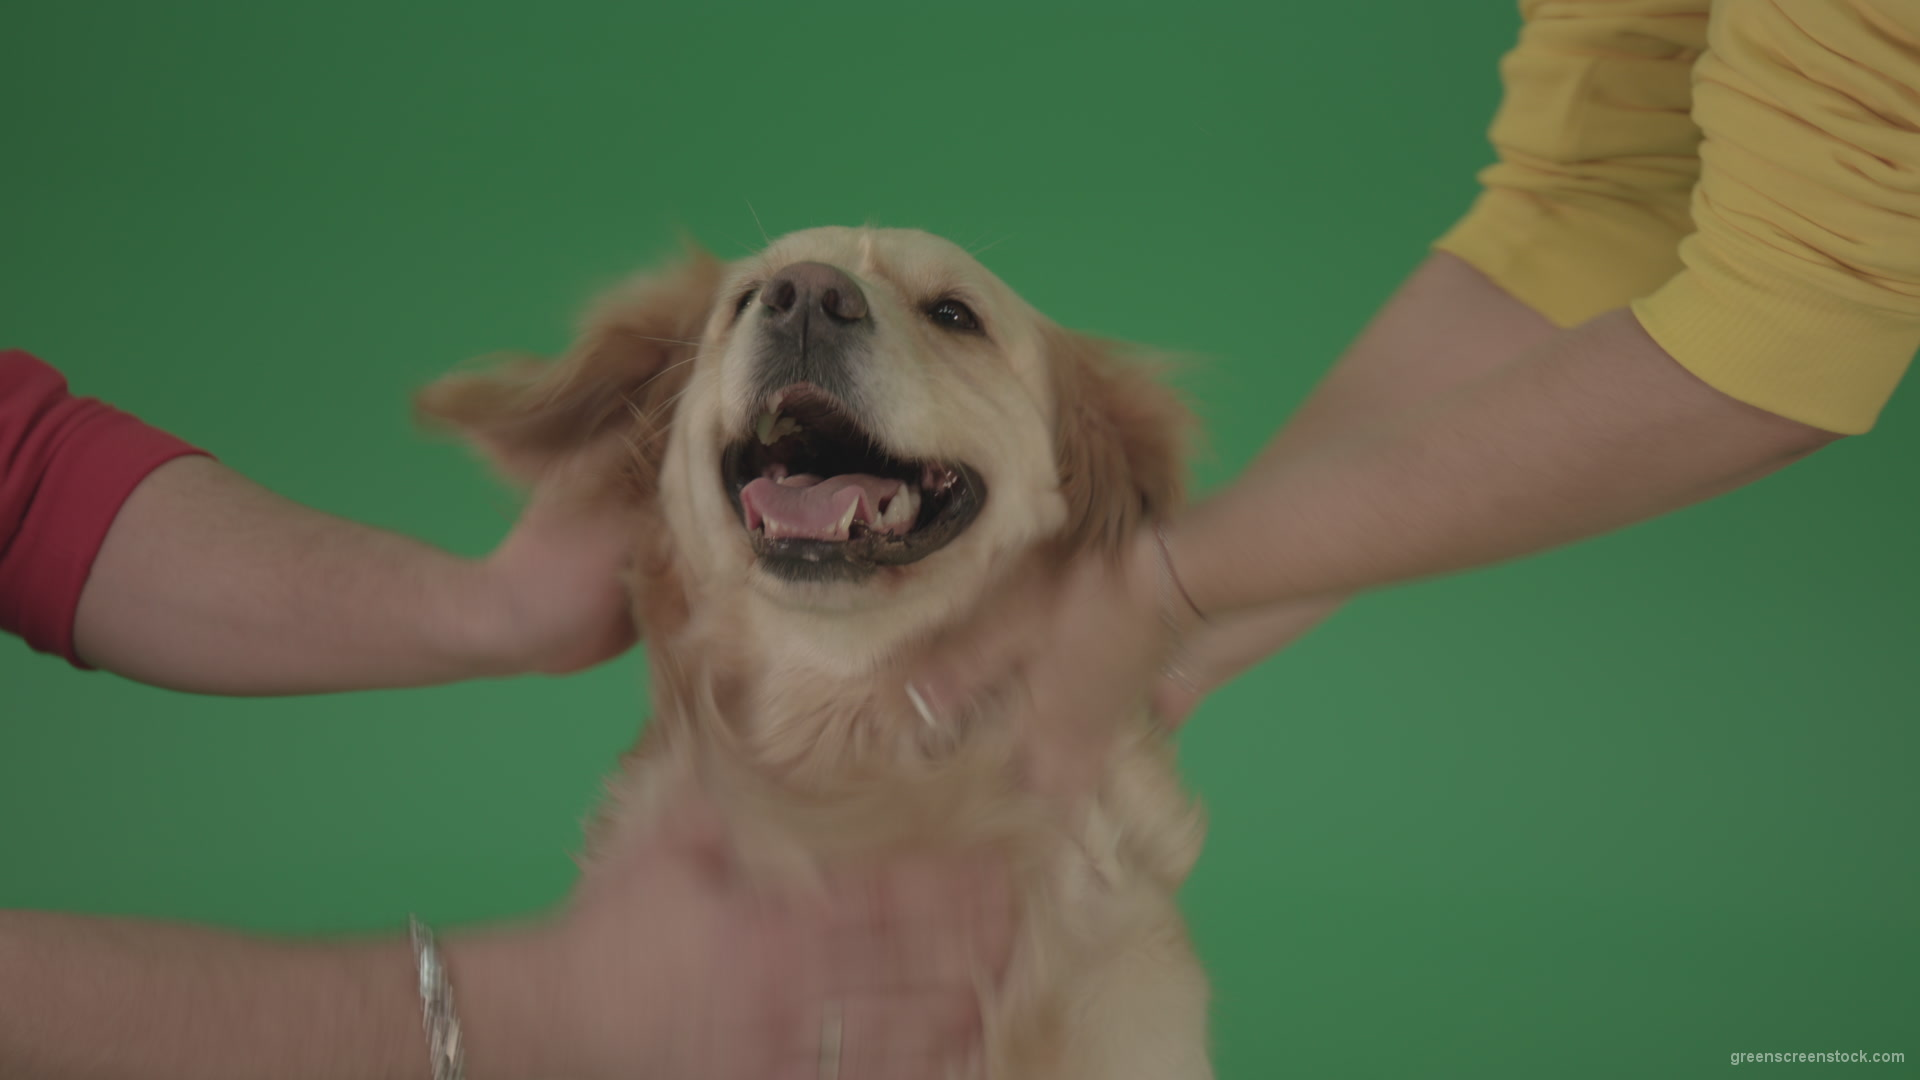 Funny-Golden-Retriever-owners-stroke-from-two-hands-hunter-Dog-isolated-on-green-screen-4K-video-footage_004 Green Screen Stock